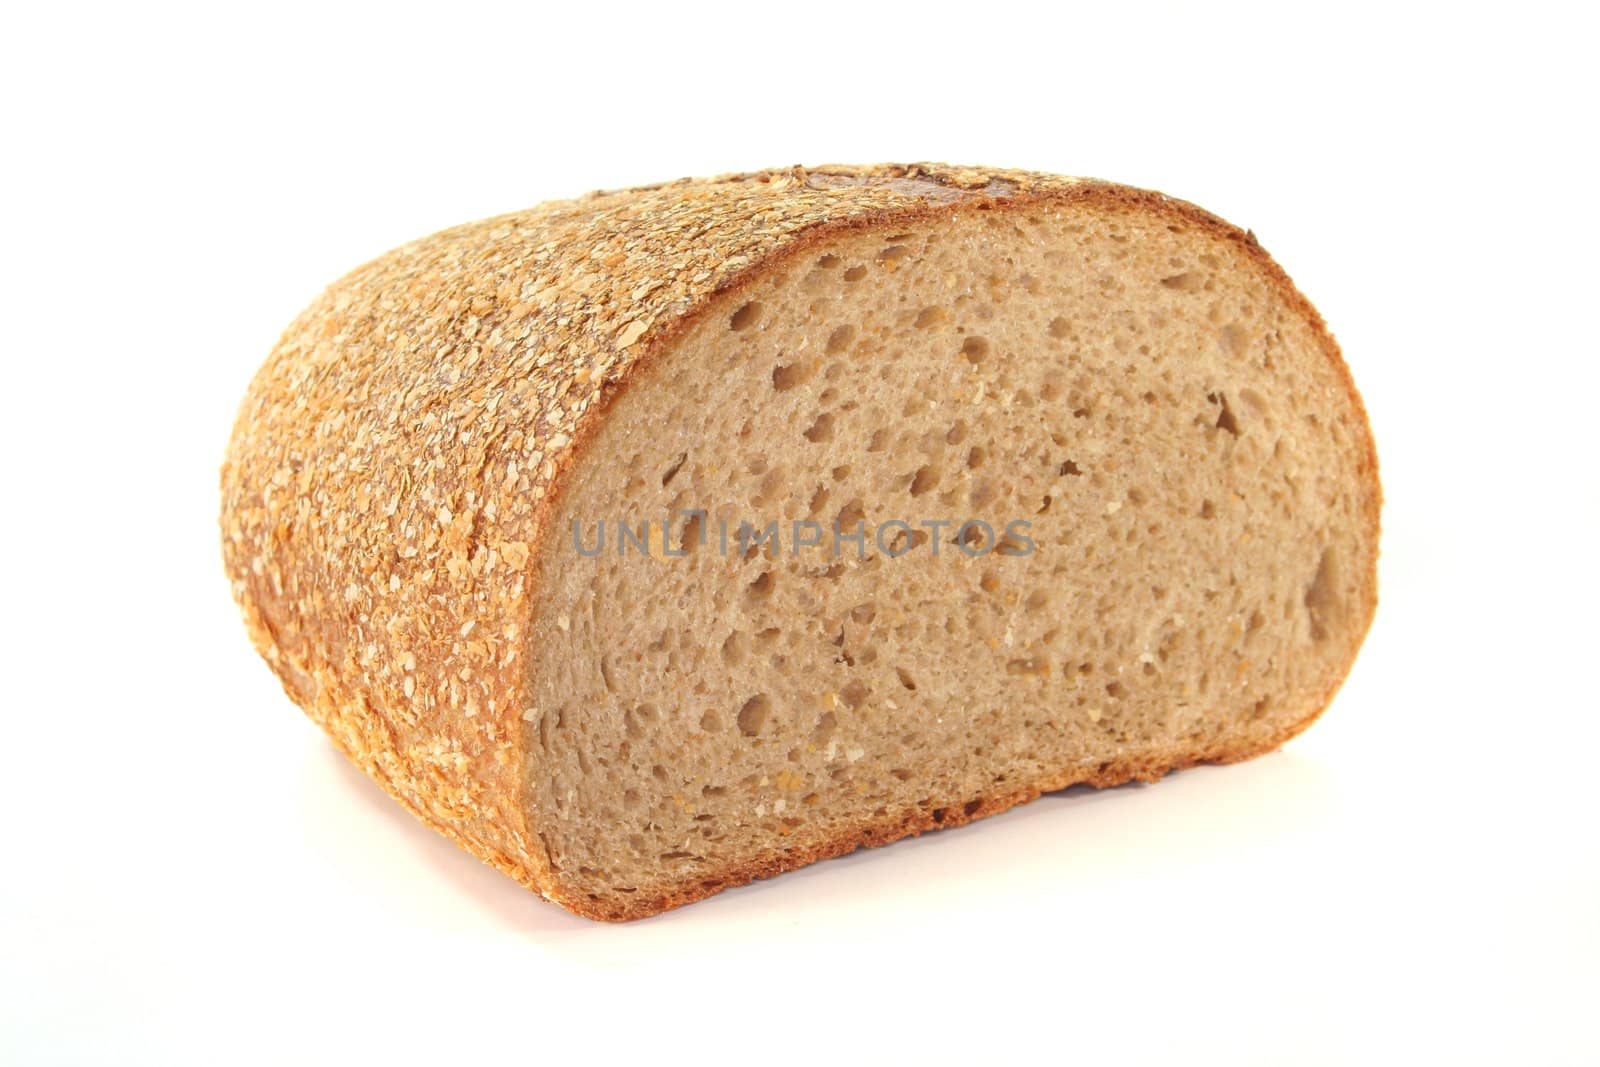 Bread by discovery